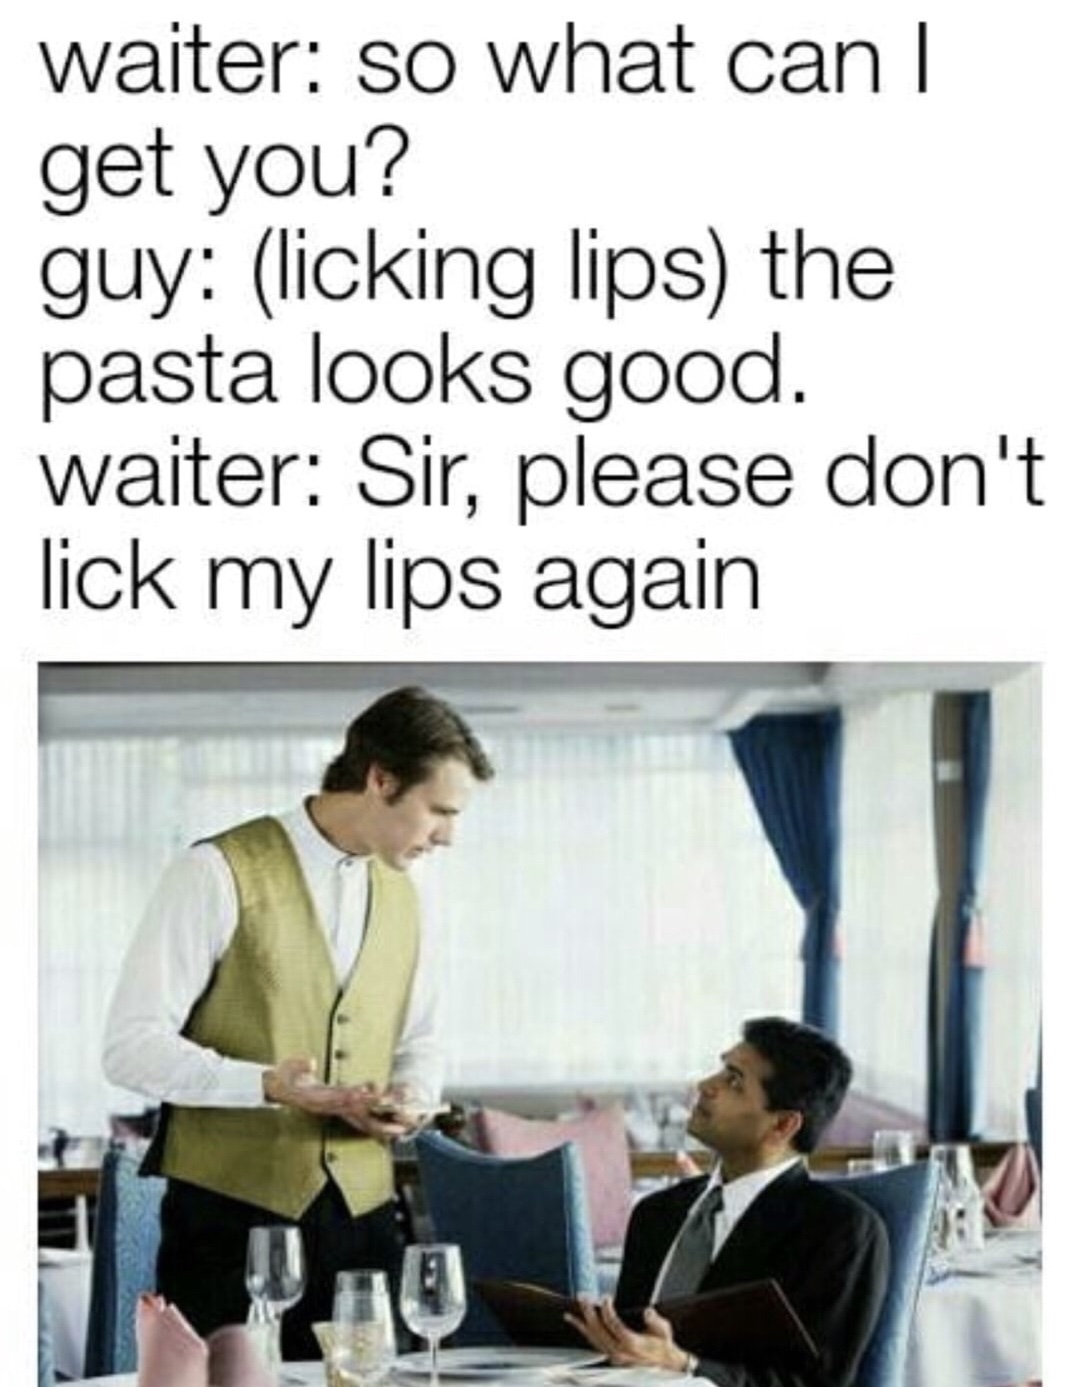 waiter dank memes - waiter so what can | get you? guy licking lips the pasta looks good. waiter Sir, please don't lick my lips again